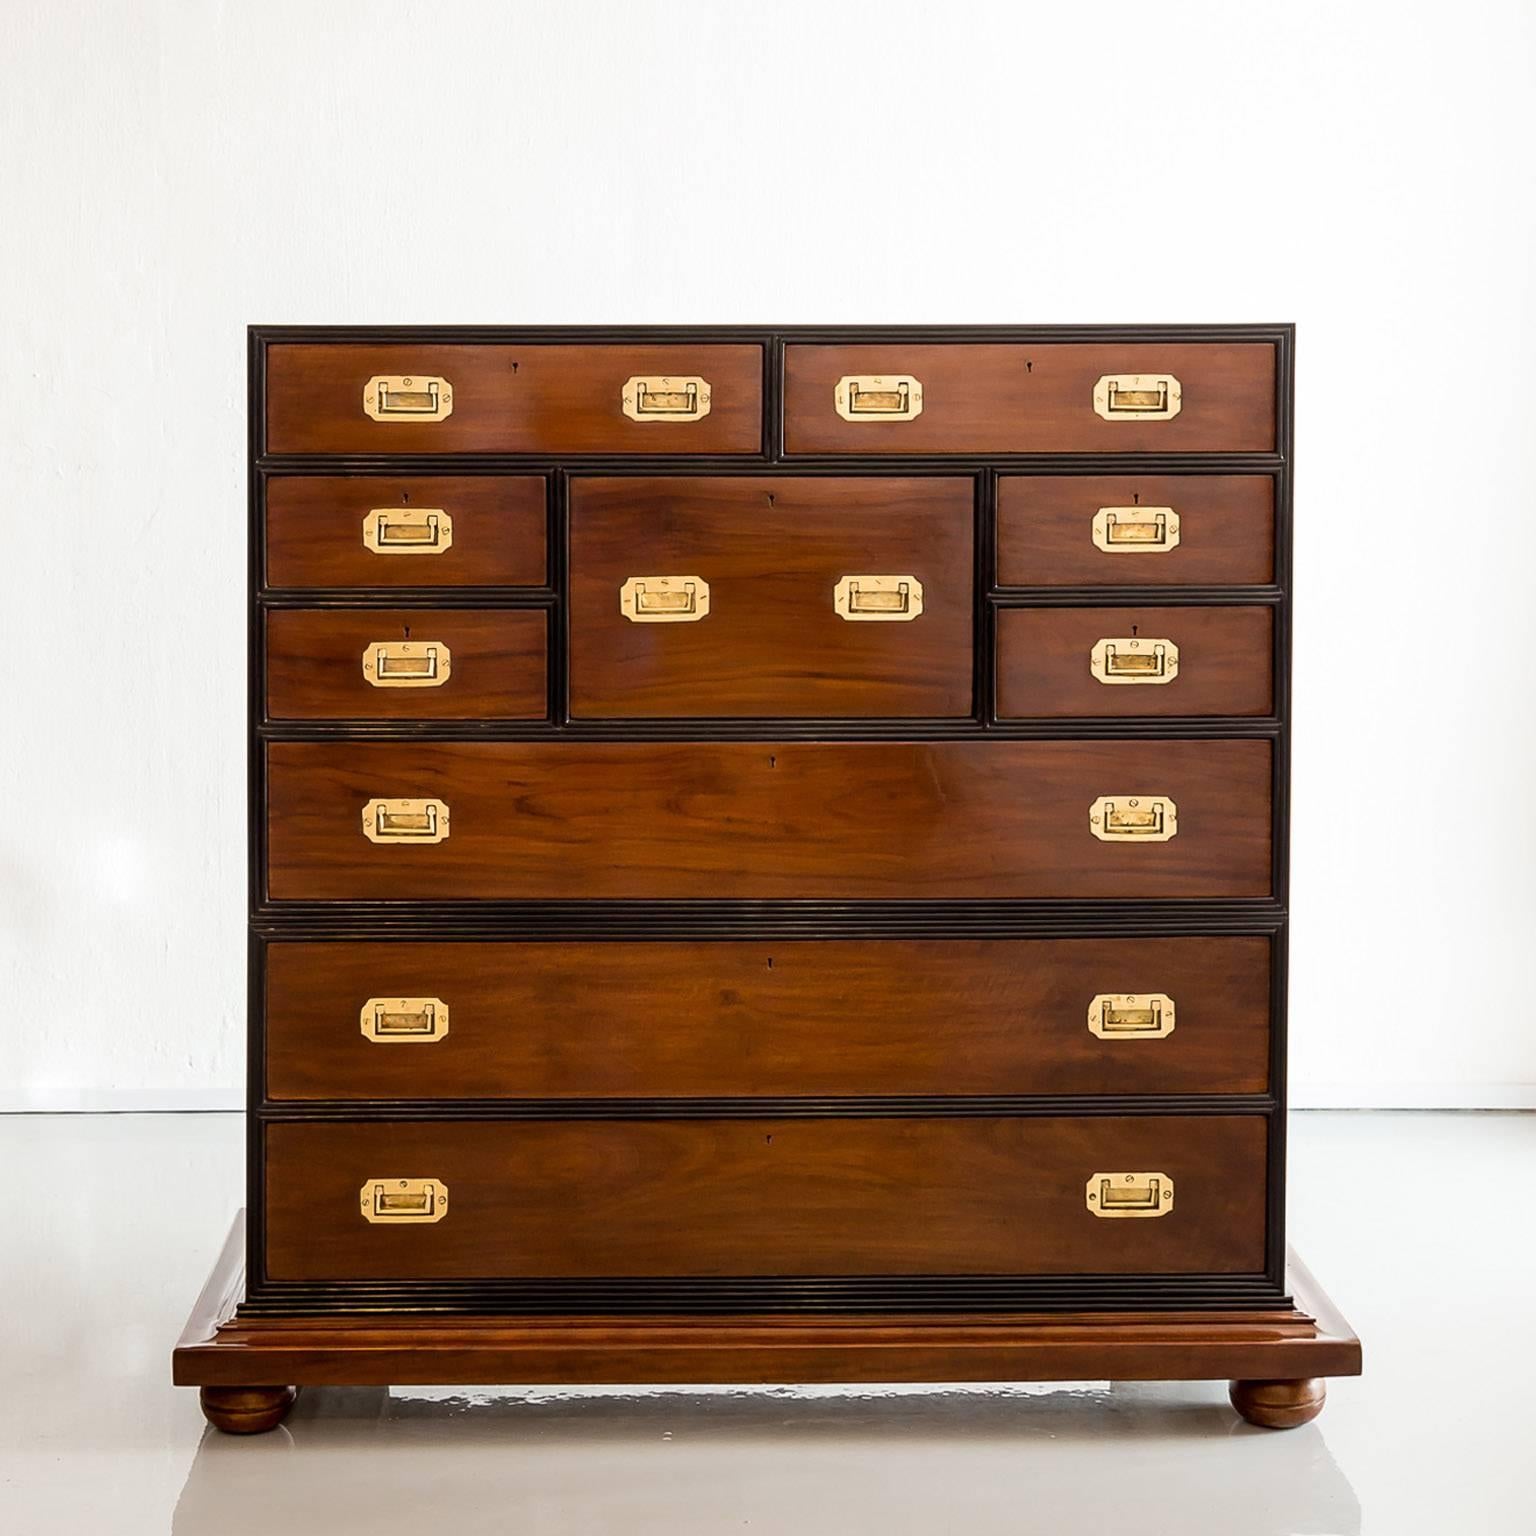 A beautiful British colonial camphor secretaire chest, the top portion with six short drawers and one central secretaire drawer above one long drawer. 
The secretaire drawer pulls out and drops down to reveal a writing surface and a fitted interior